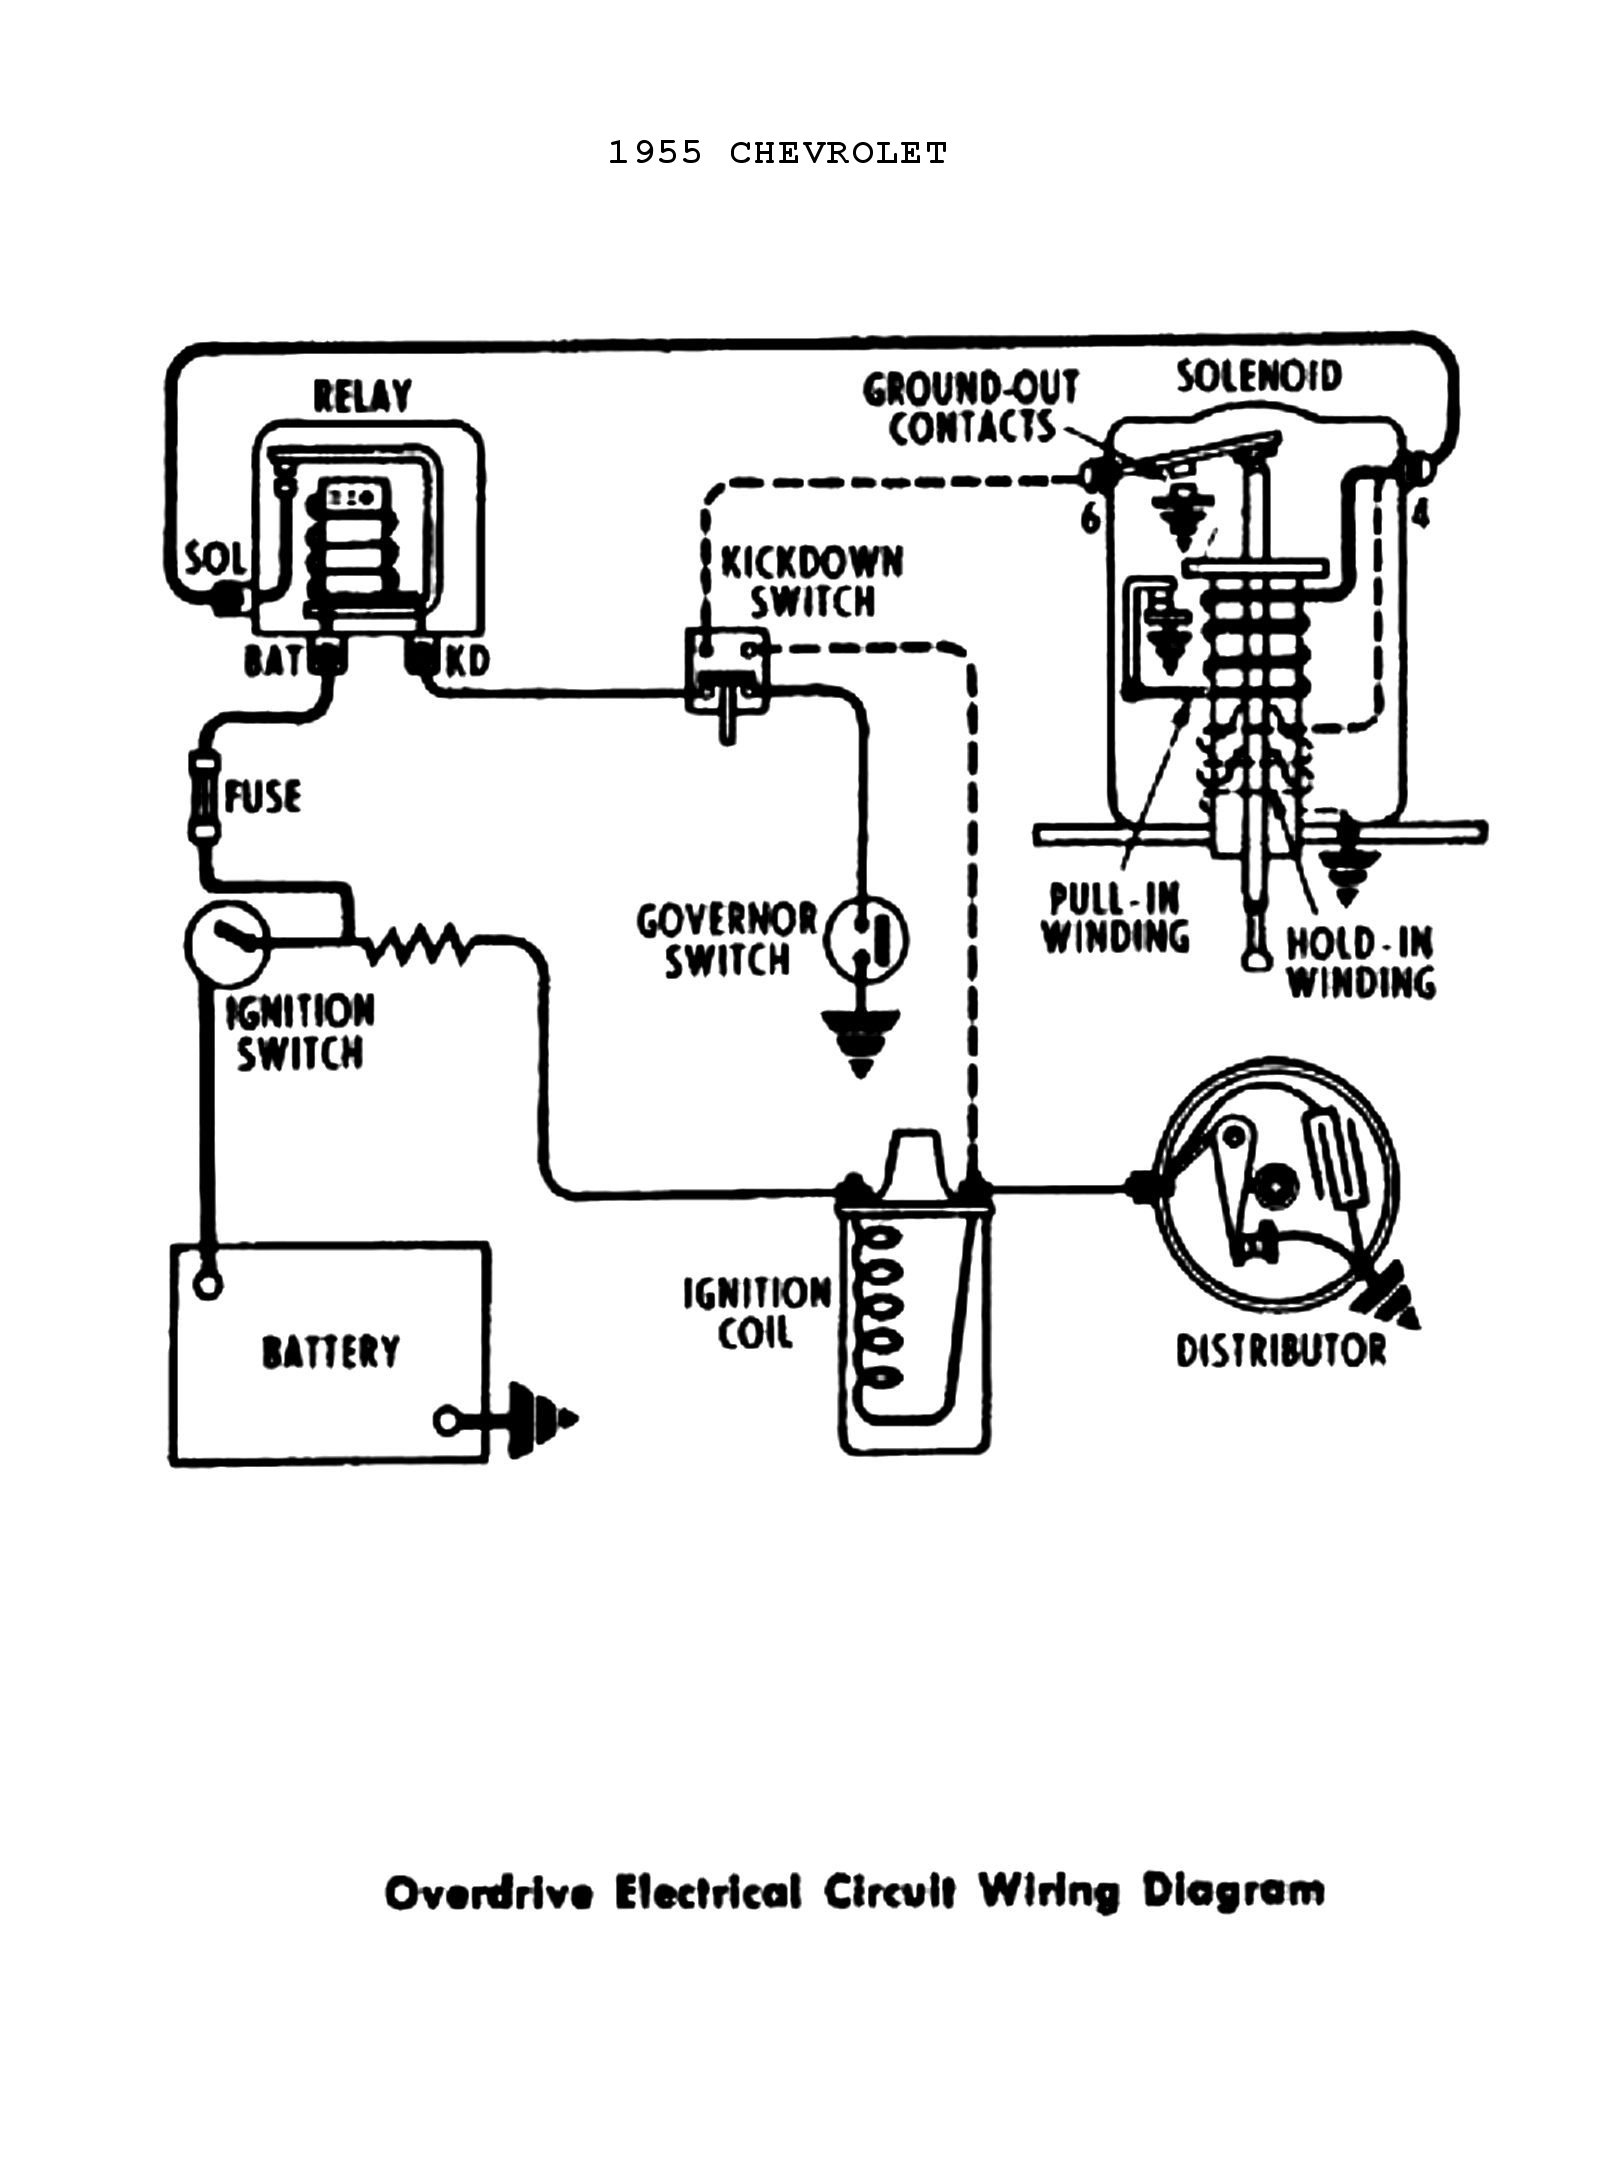 Coil And Distributor Wiring Diagram - Wiring Diagrams Hubs - 12 Volt Ignition Coil Wiring Diagram